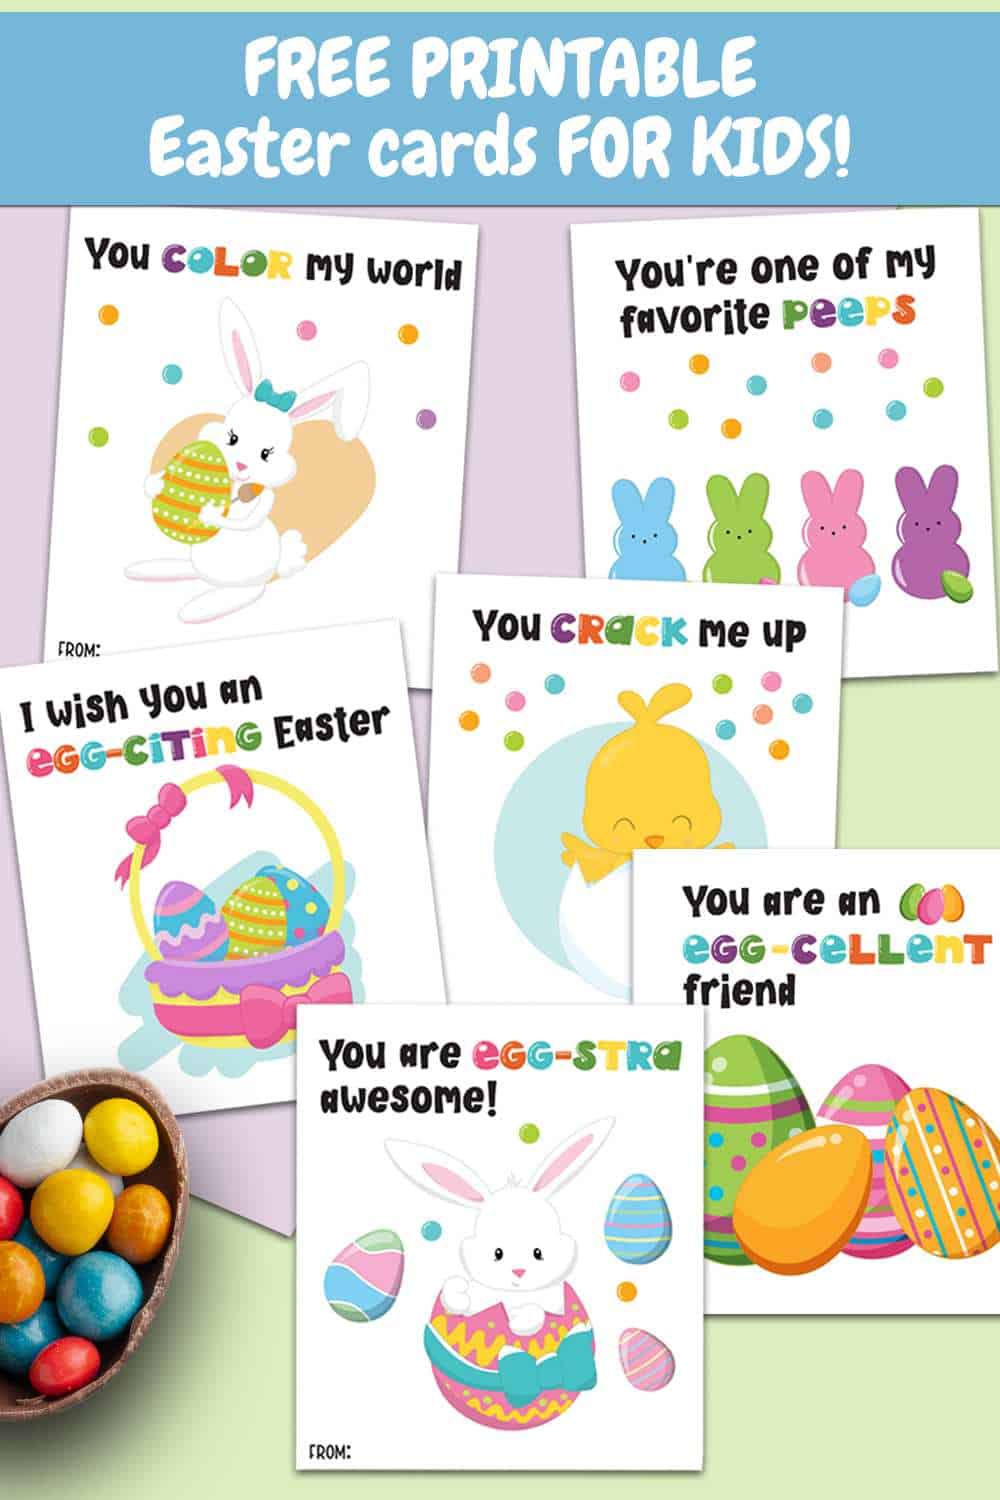 free printable Easter cards for kids